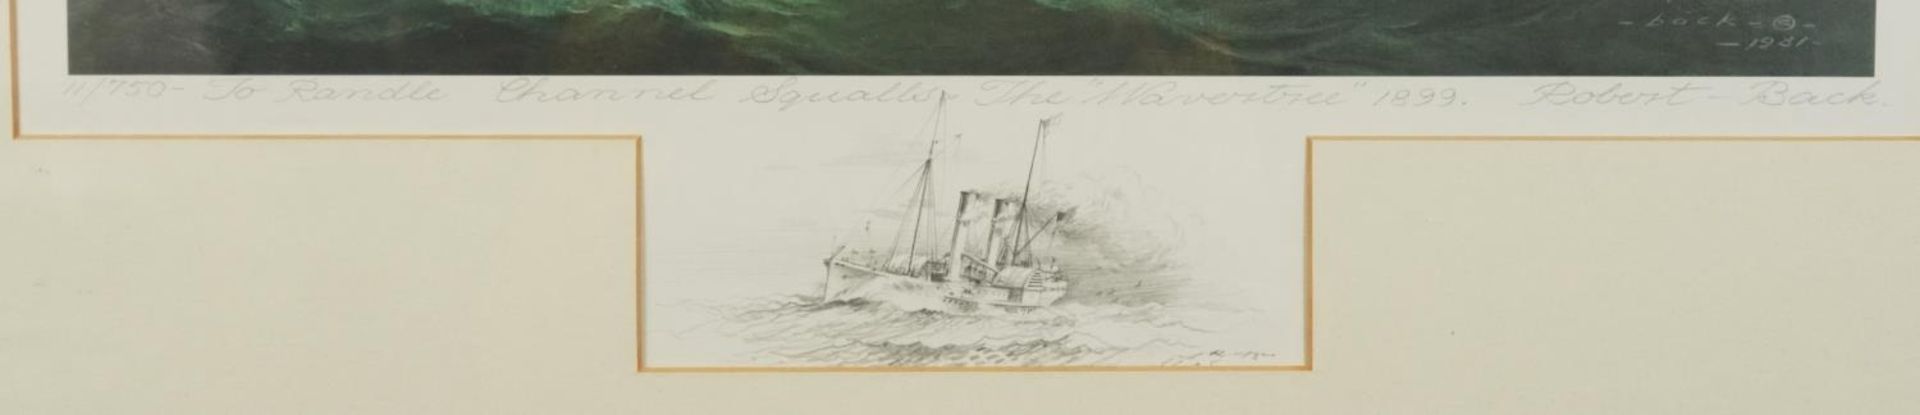 Robert Trenaman Back - To Randall Channel Squalls the Wavertree 1899, pencil signed print in colour, - Image 4 of 7